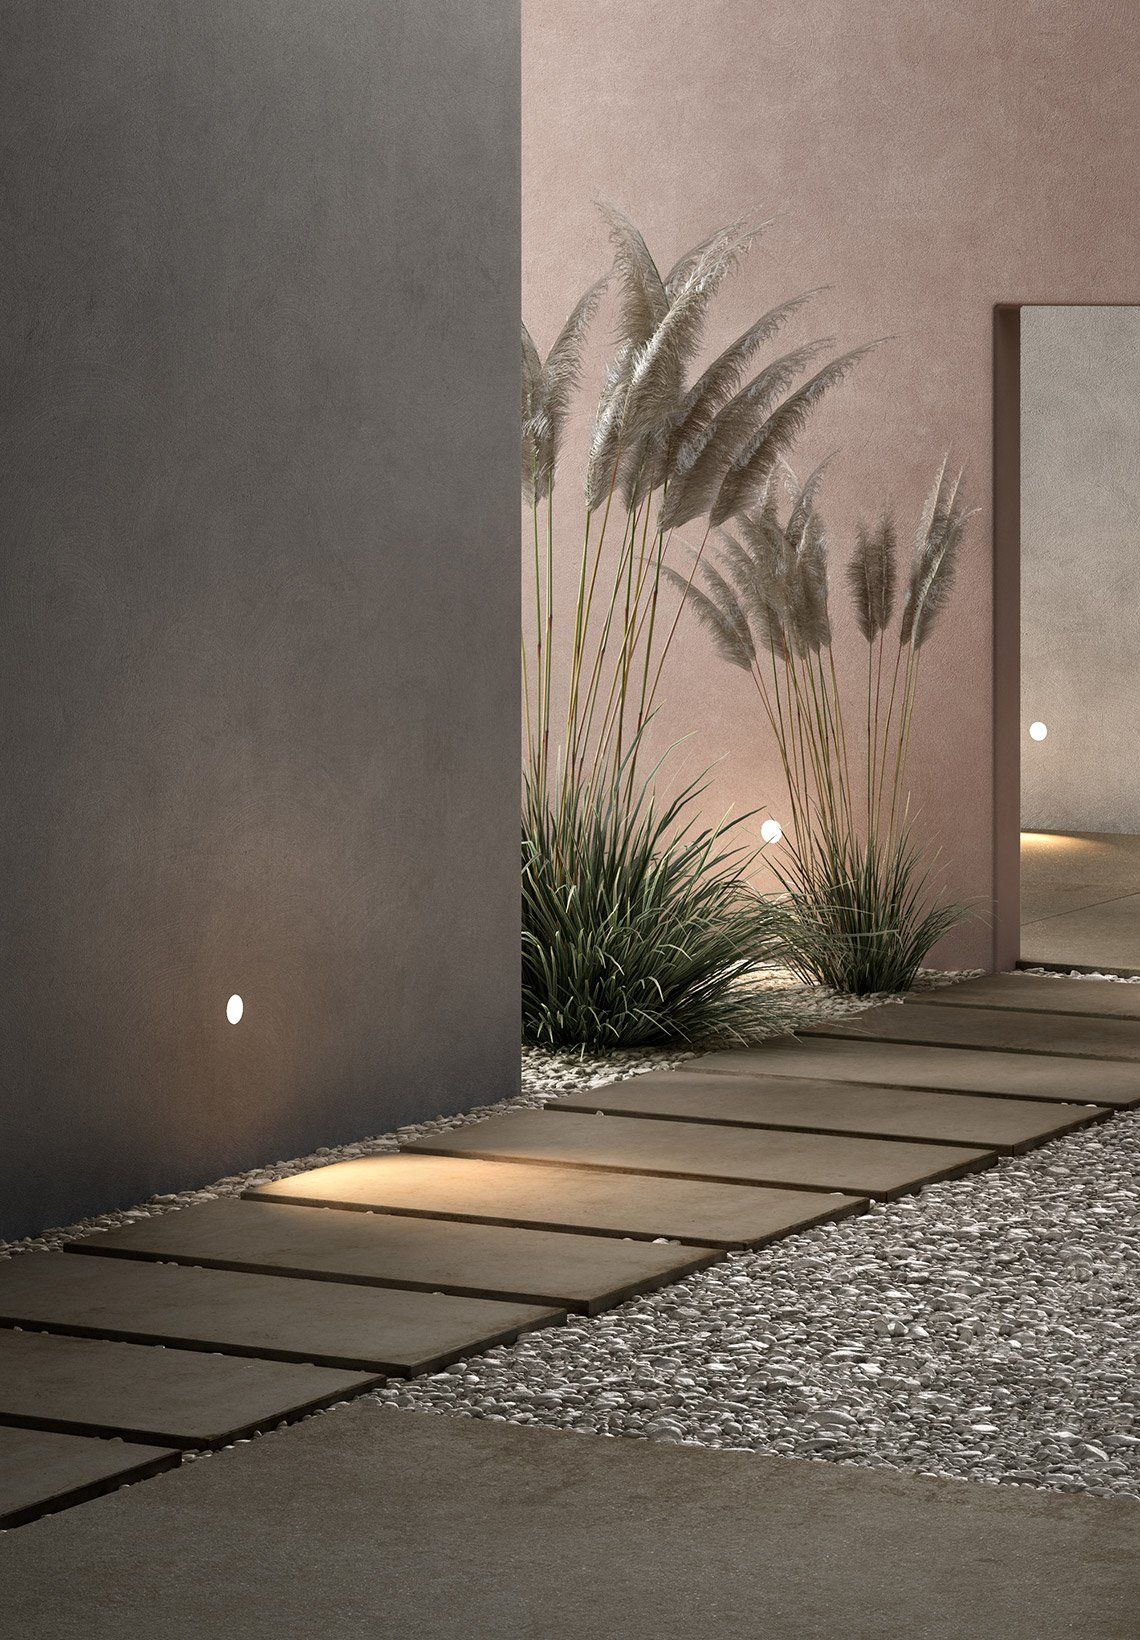 Illuminate Your Outdoor Spaces with These Creative Lighting Ideas